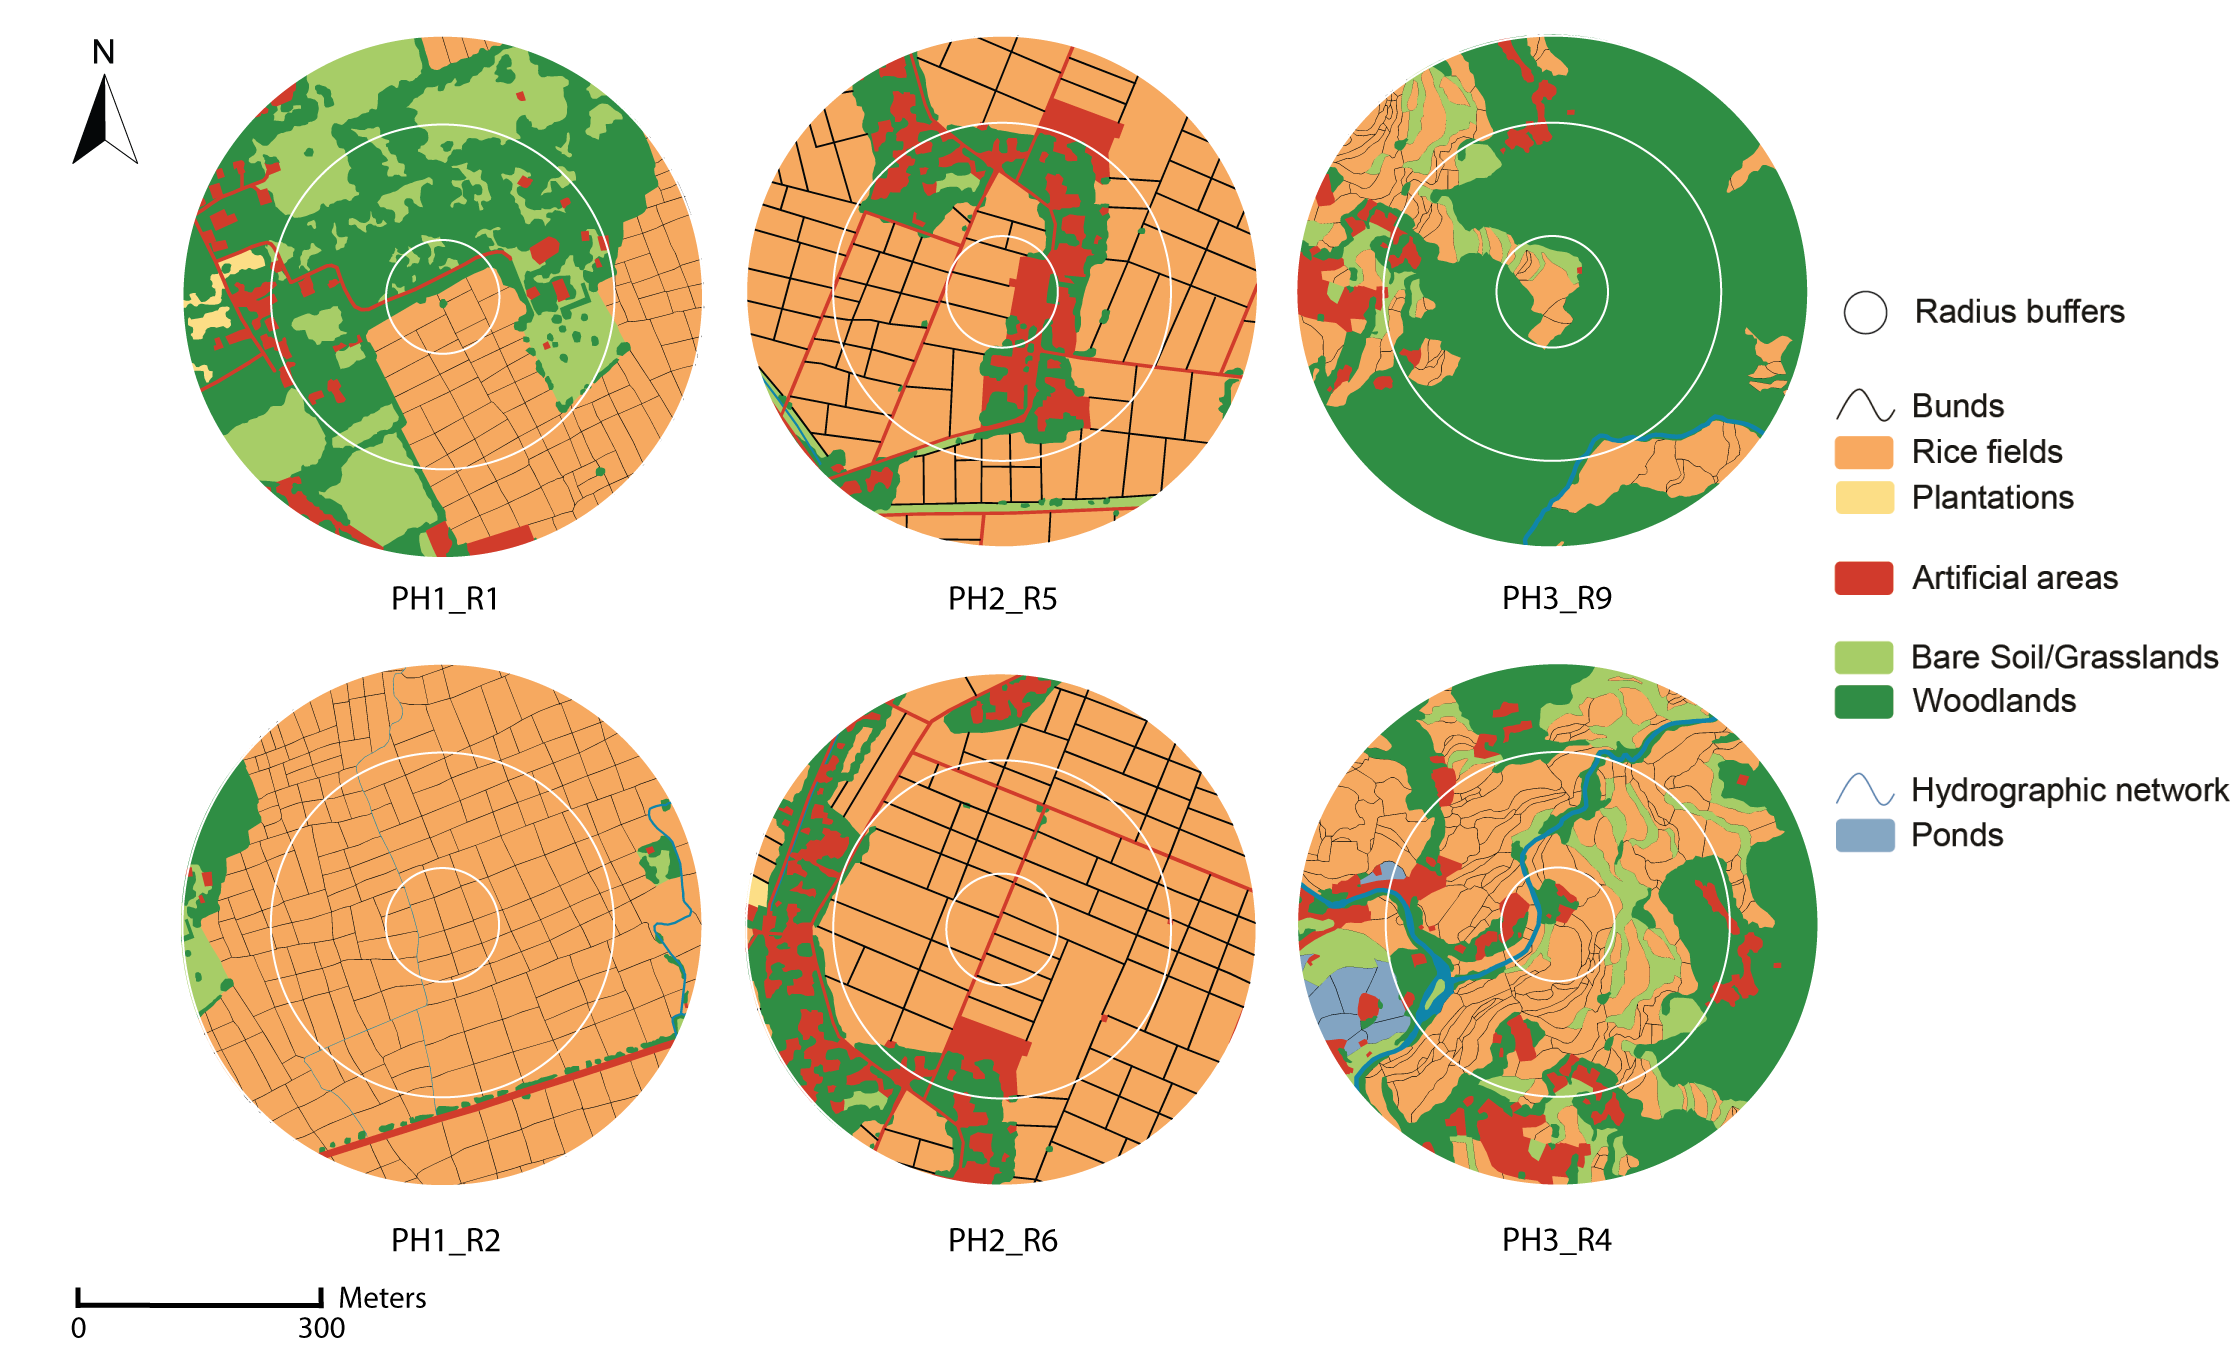 Examples of digitized maps for each region.